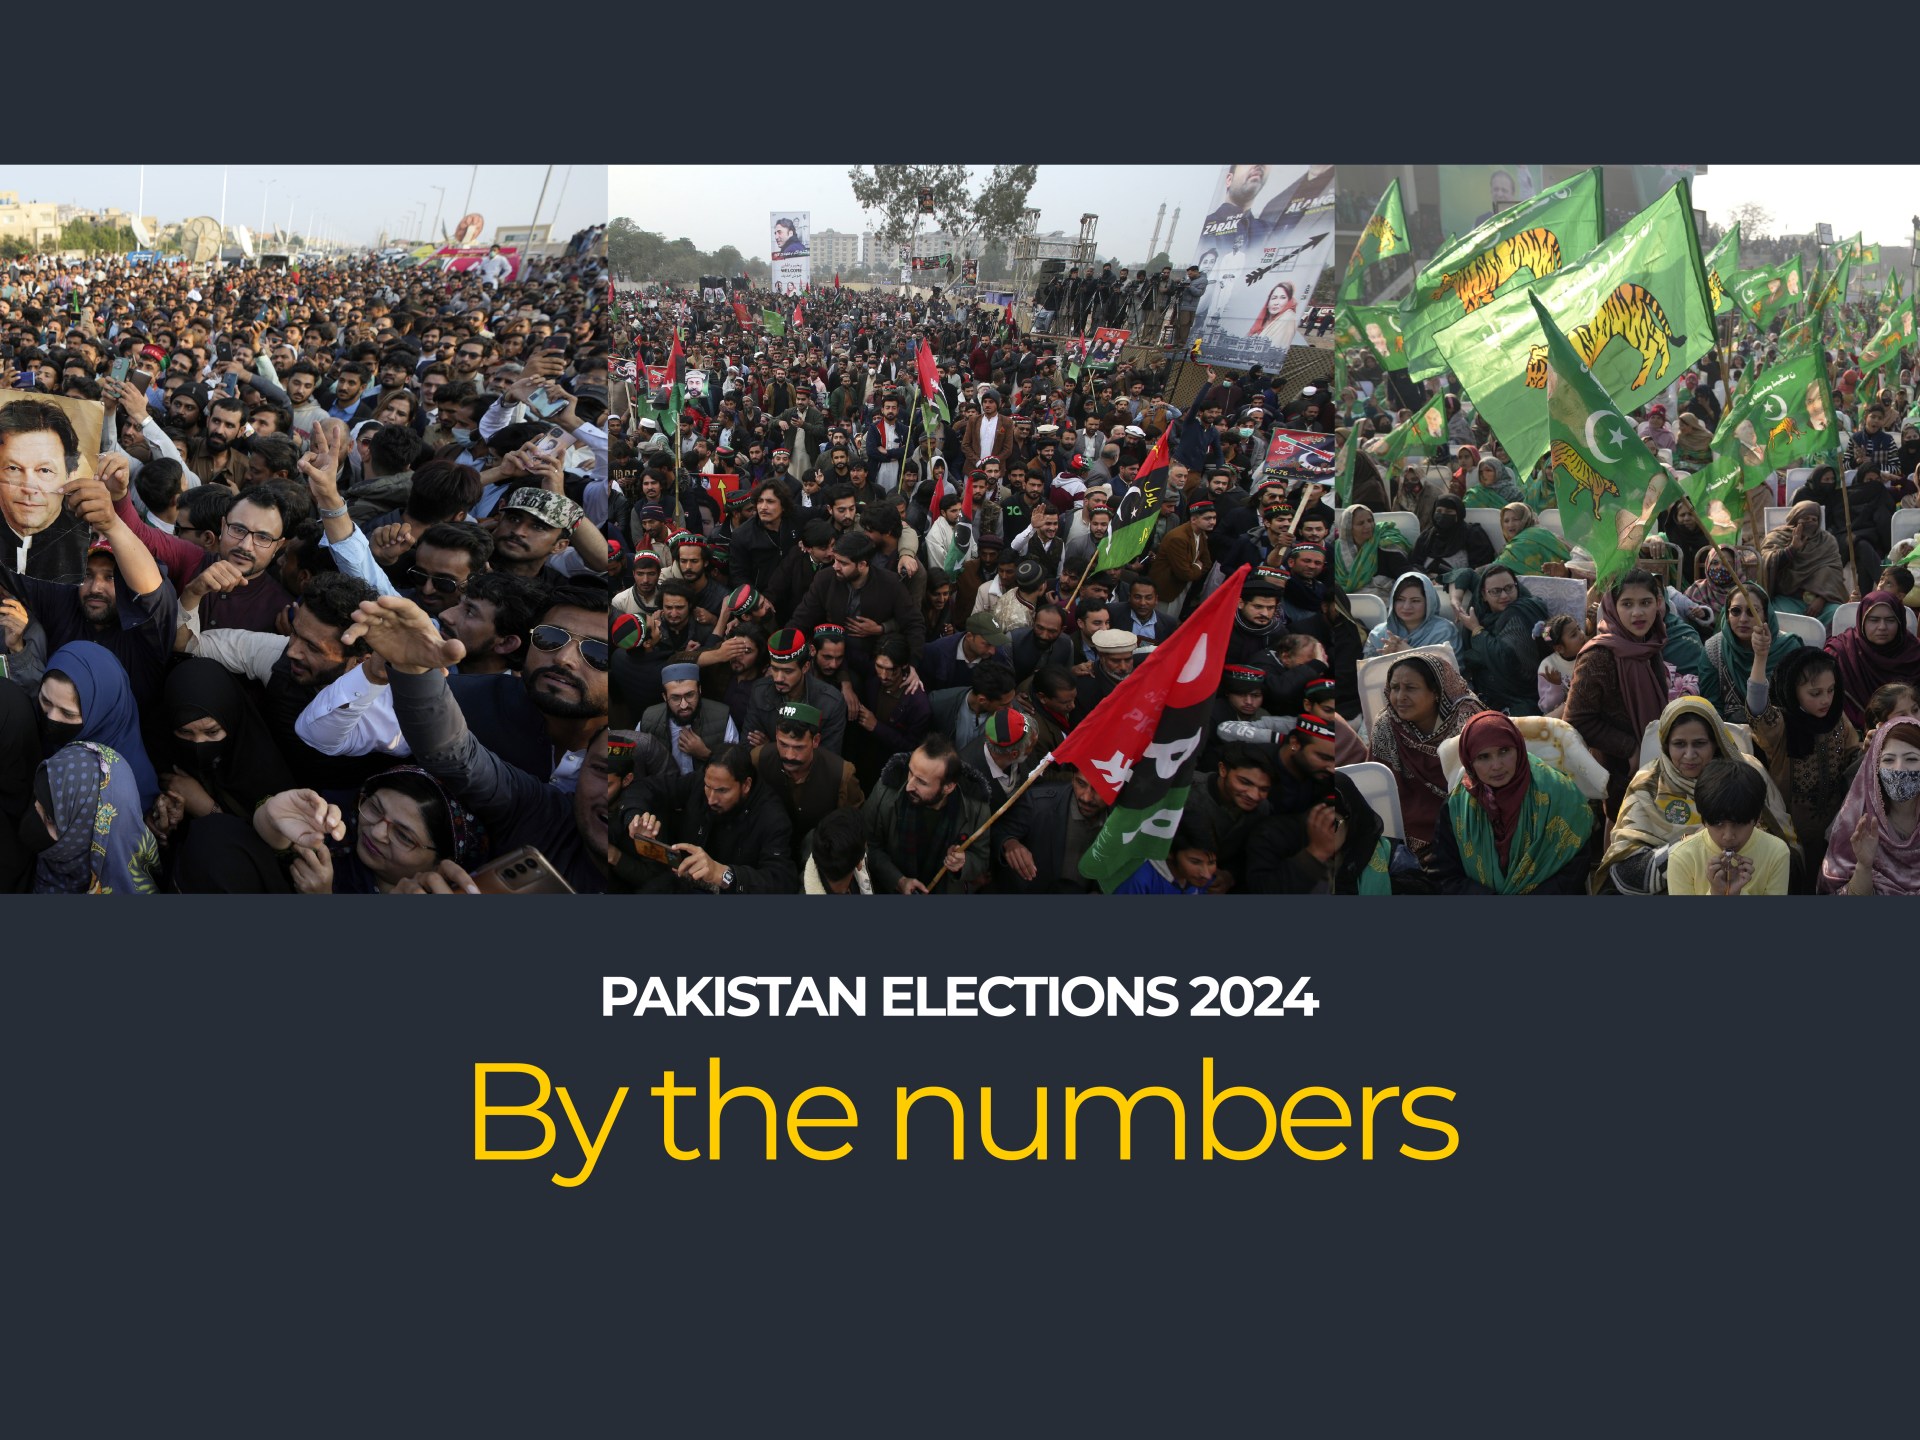 Pakistan elections 2024: By the numbers